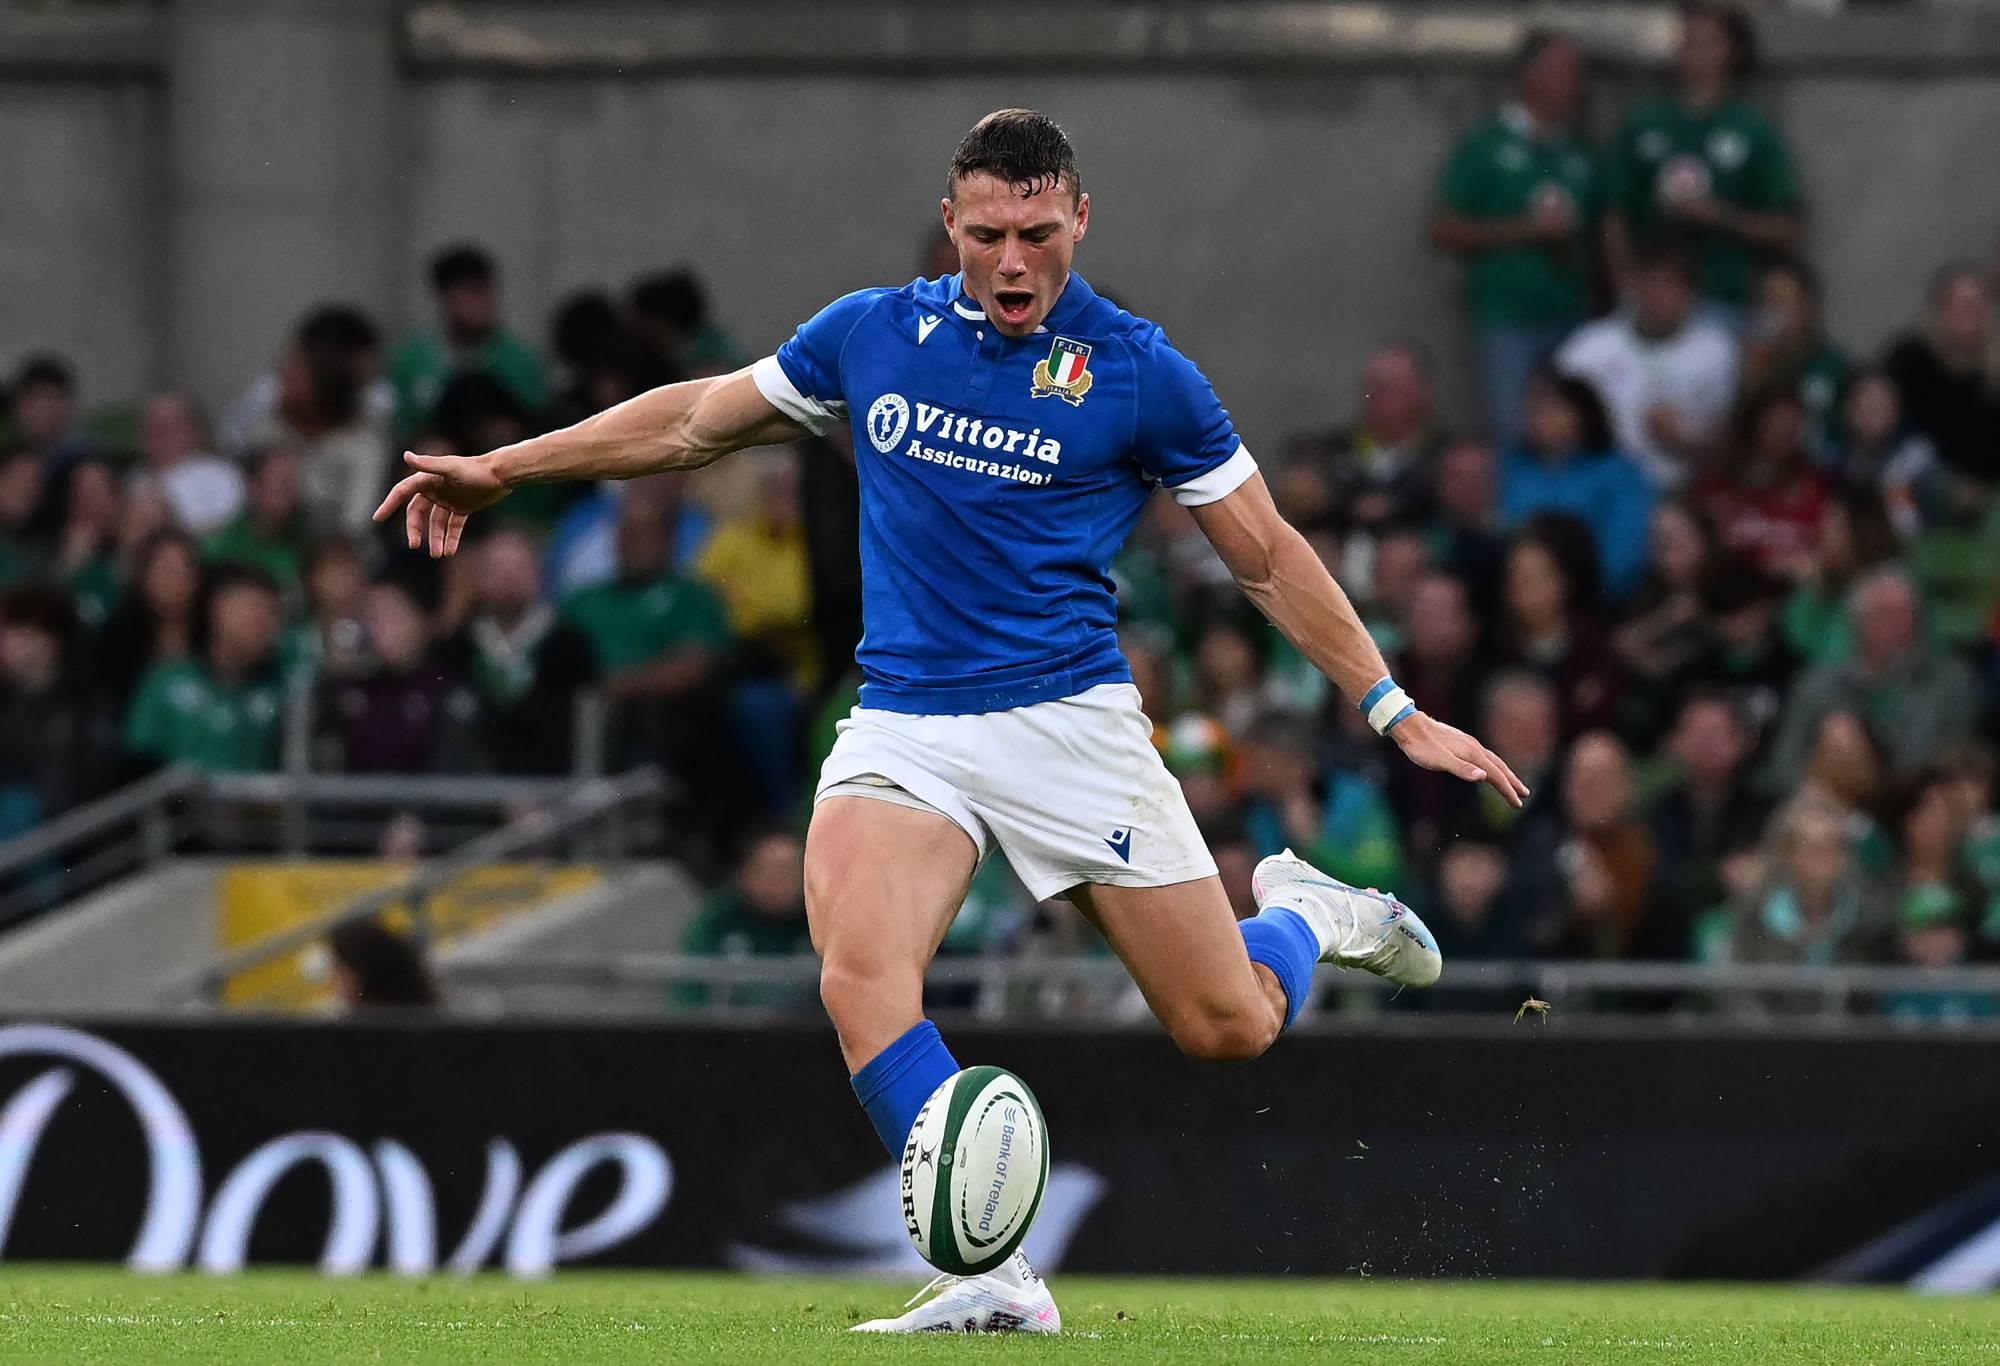 Paolo Garbisi of Italy in action during the Summer International match between Ireland and Italy at Aviva Stadium on August 5, 2023 in Dublin, Ireland. (Photo by Charles McQuillan/Federugby/Federugby via Getty Images)